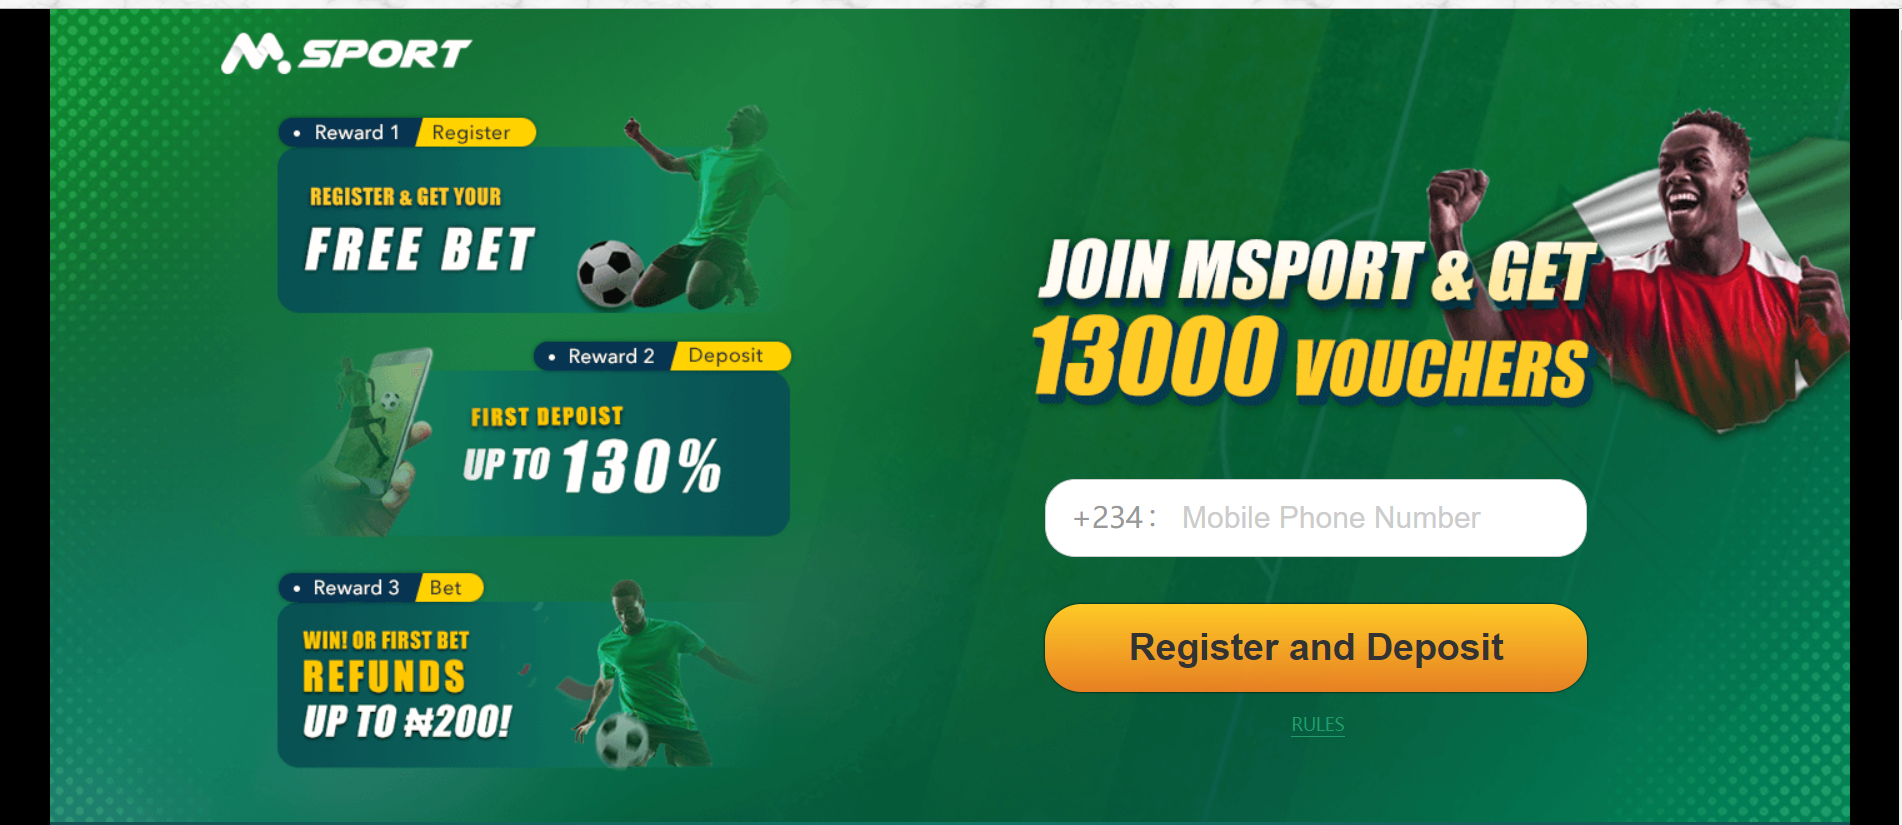 Webpage of MSport showing the three different bonuses one gets after registration.